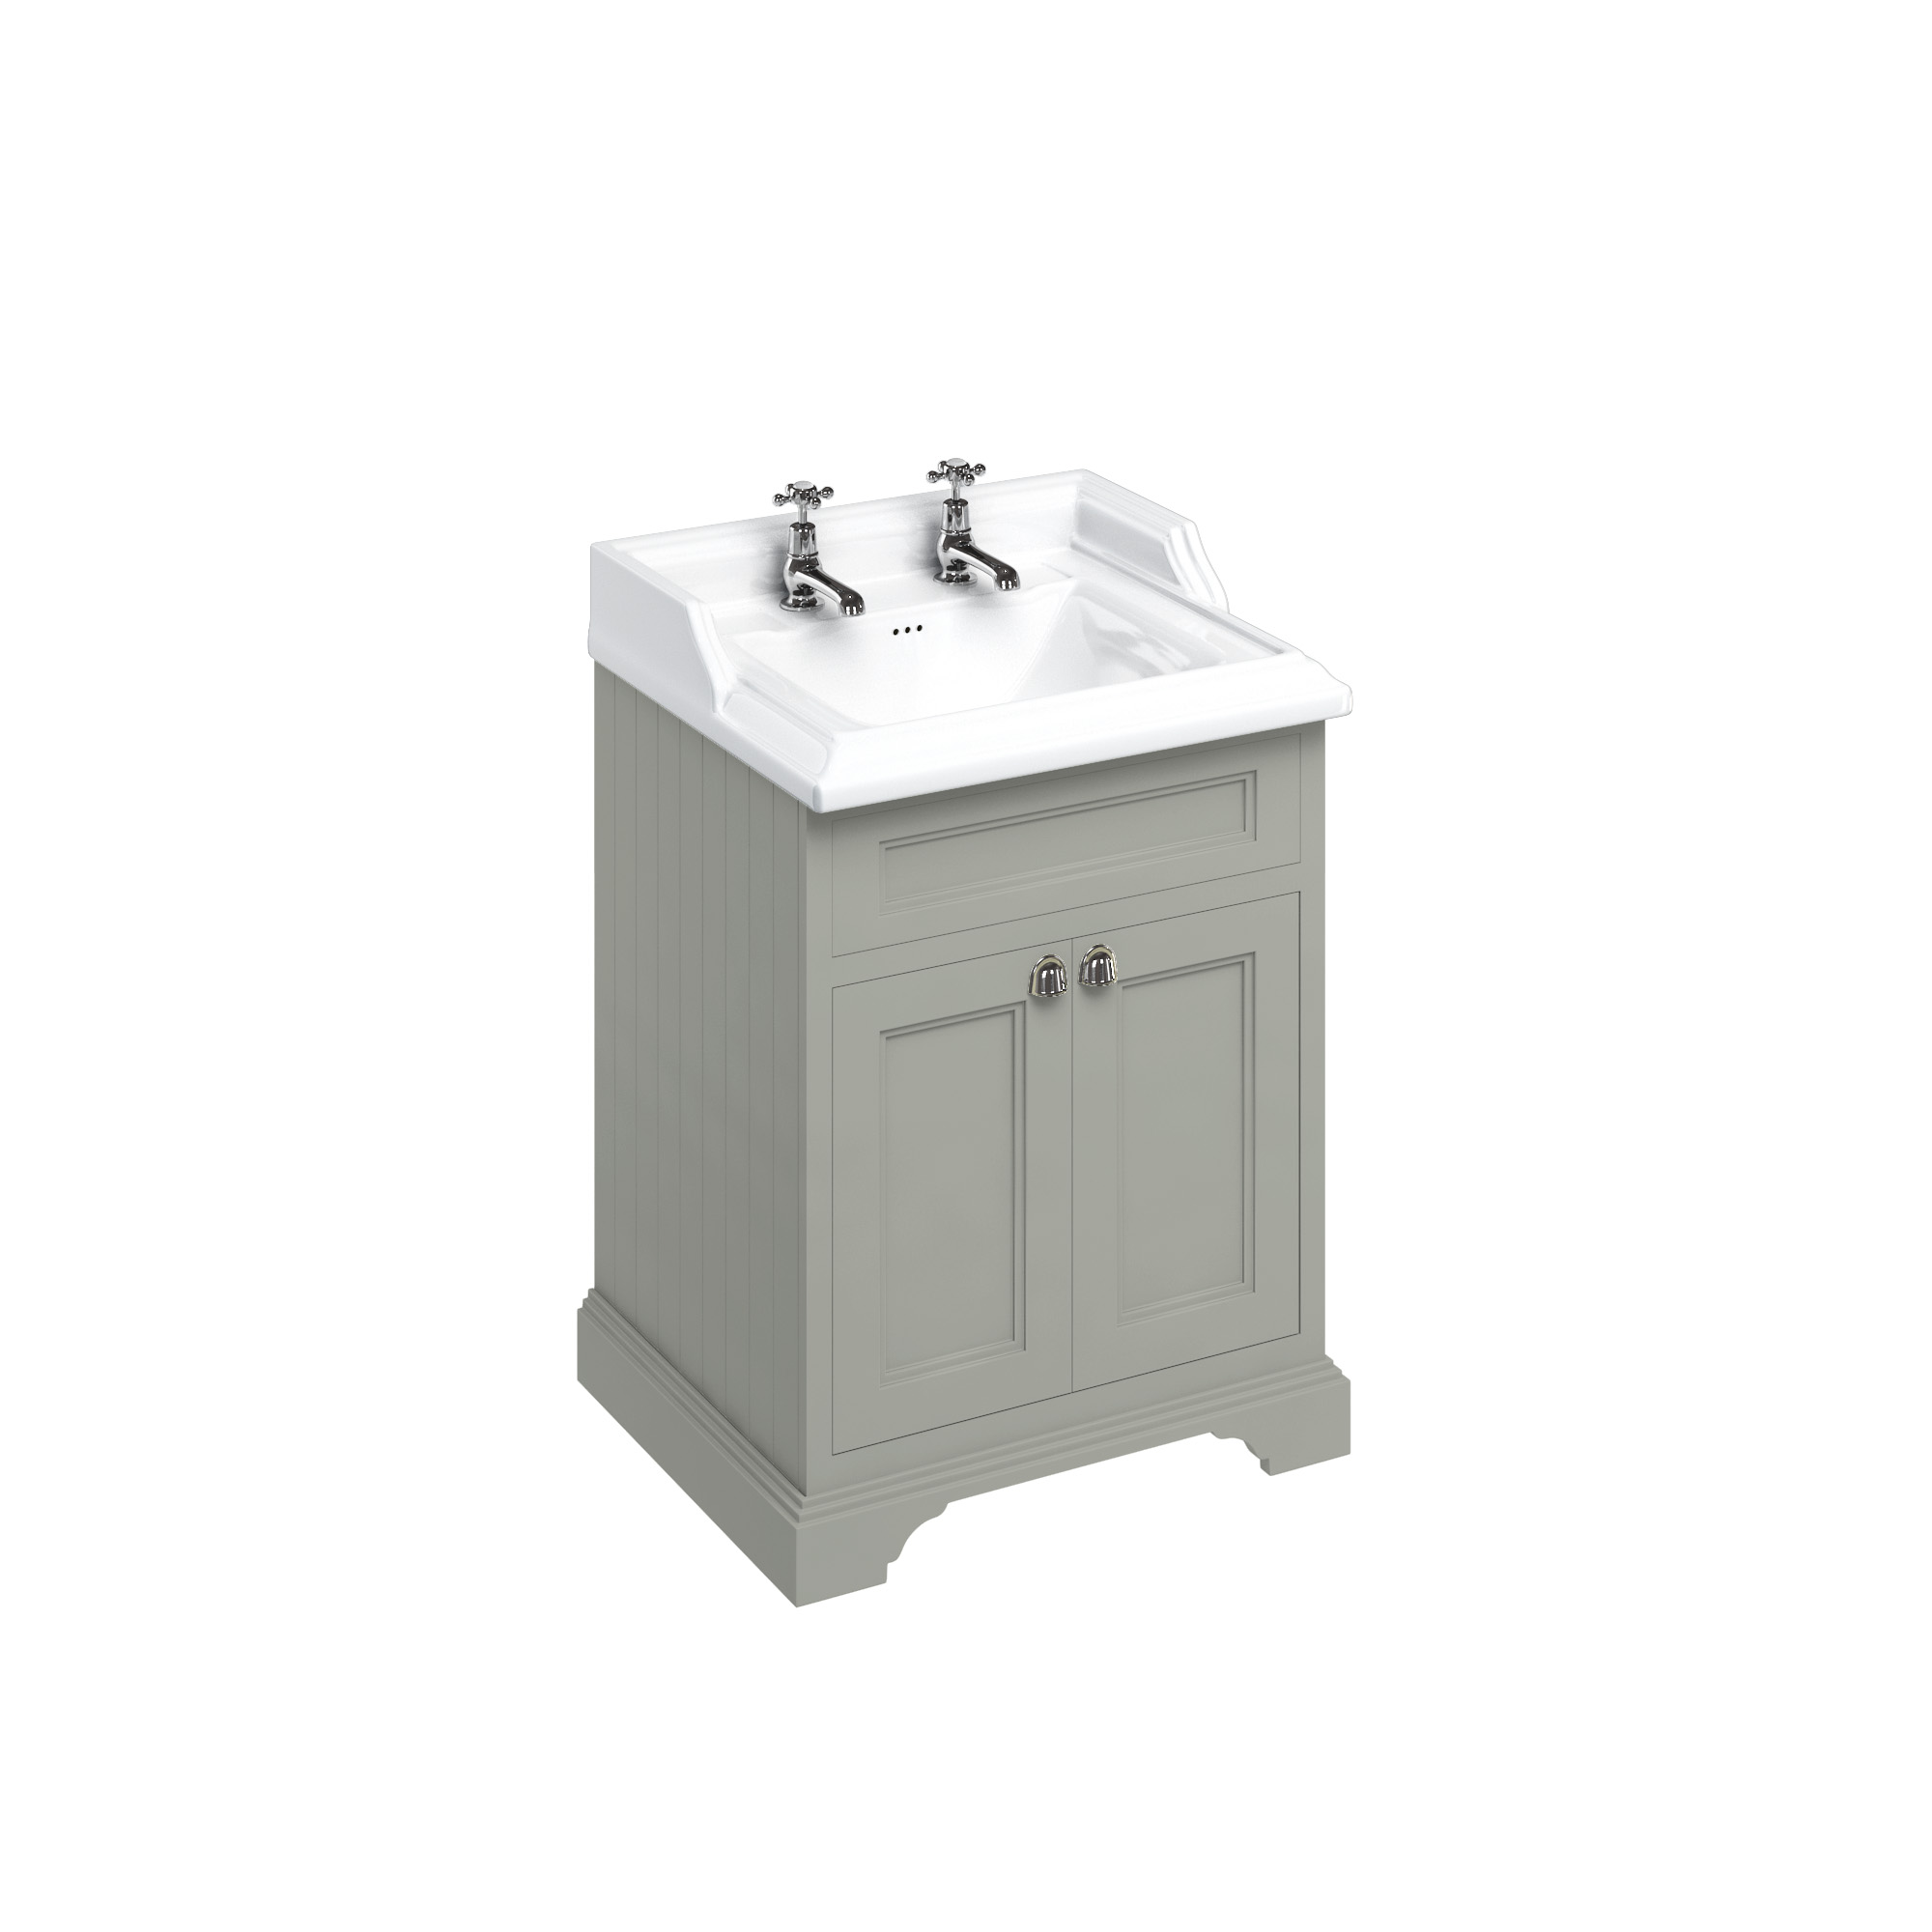 Freestanding 65 Vanity Unit with doors - Dark Olive and Classic basin 2 tap holes